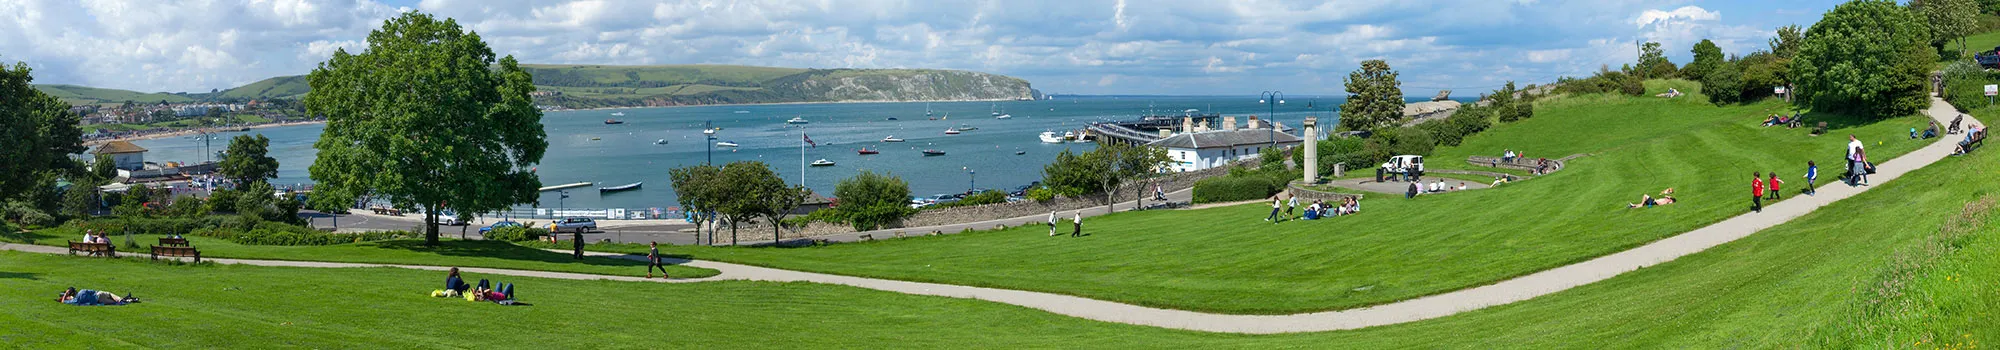 Learn more about the Isle of Purbeck